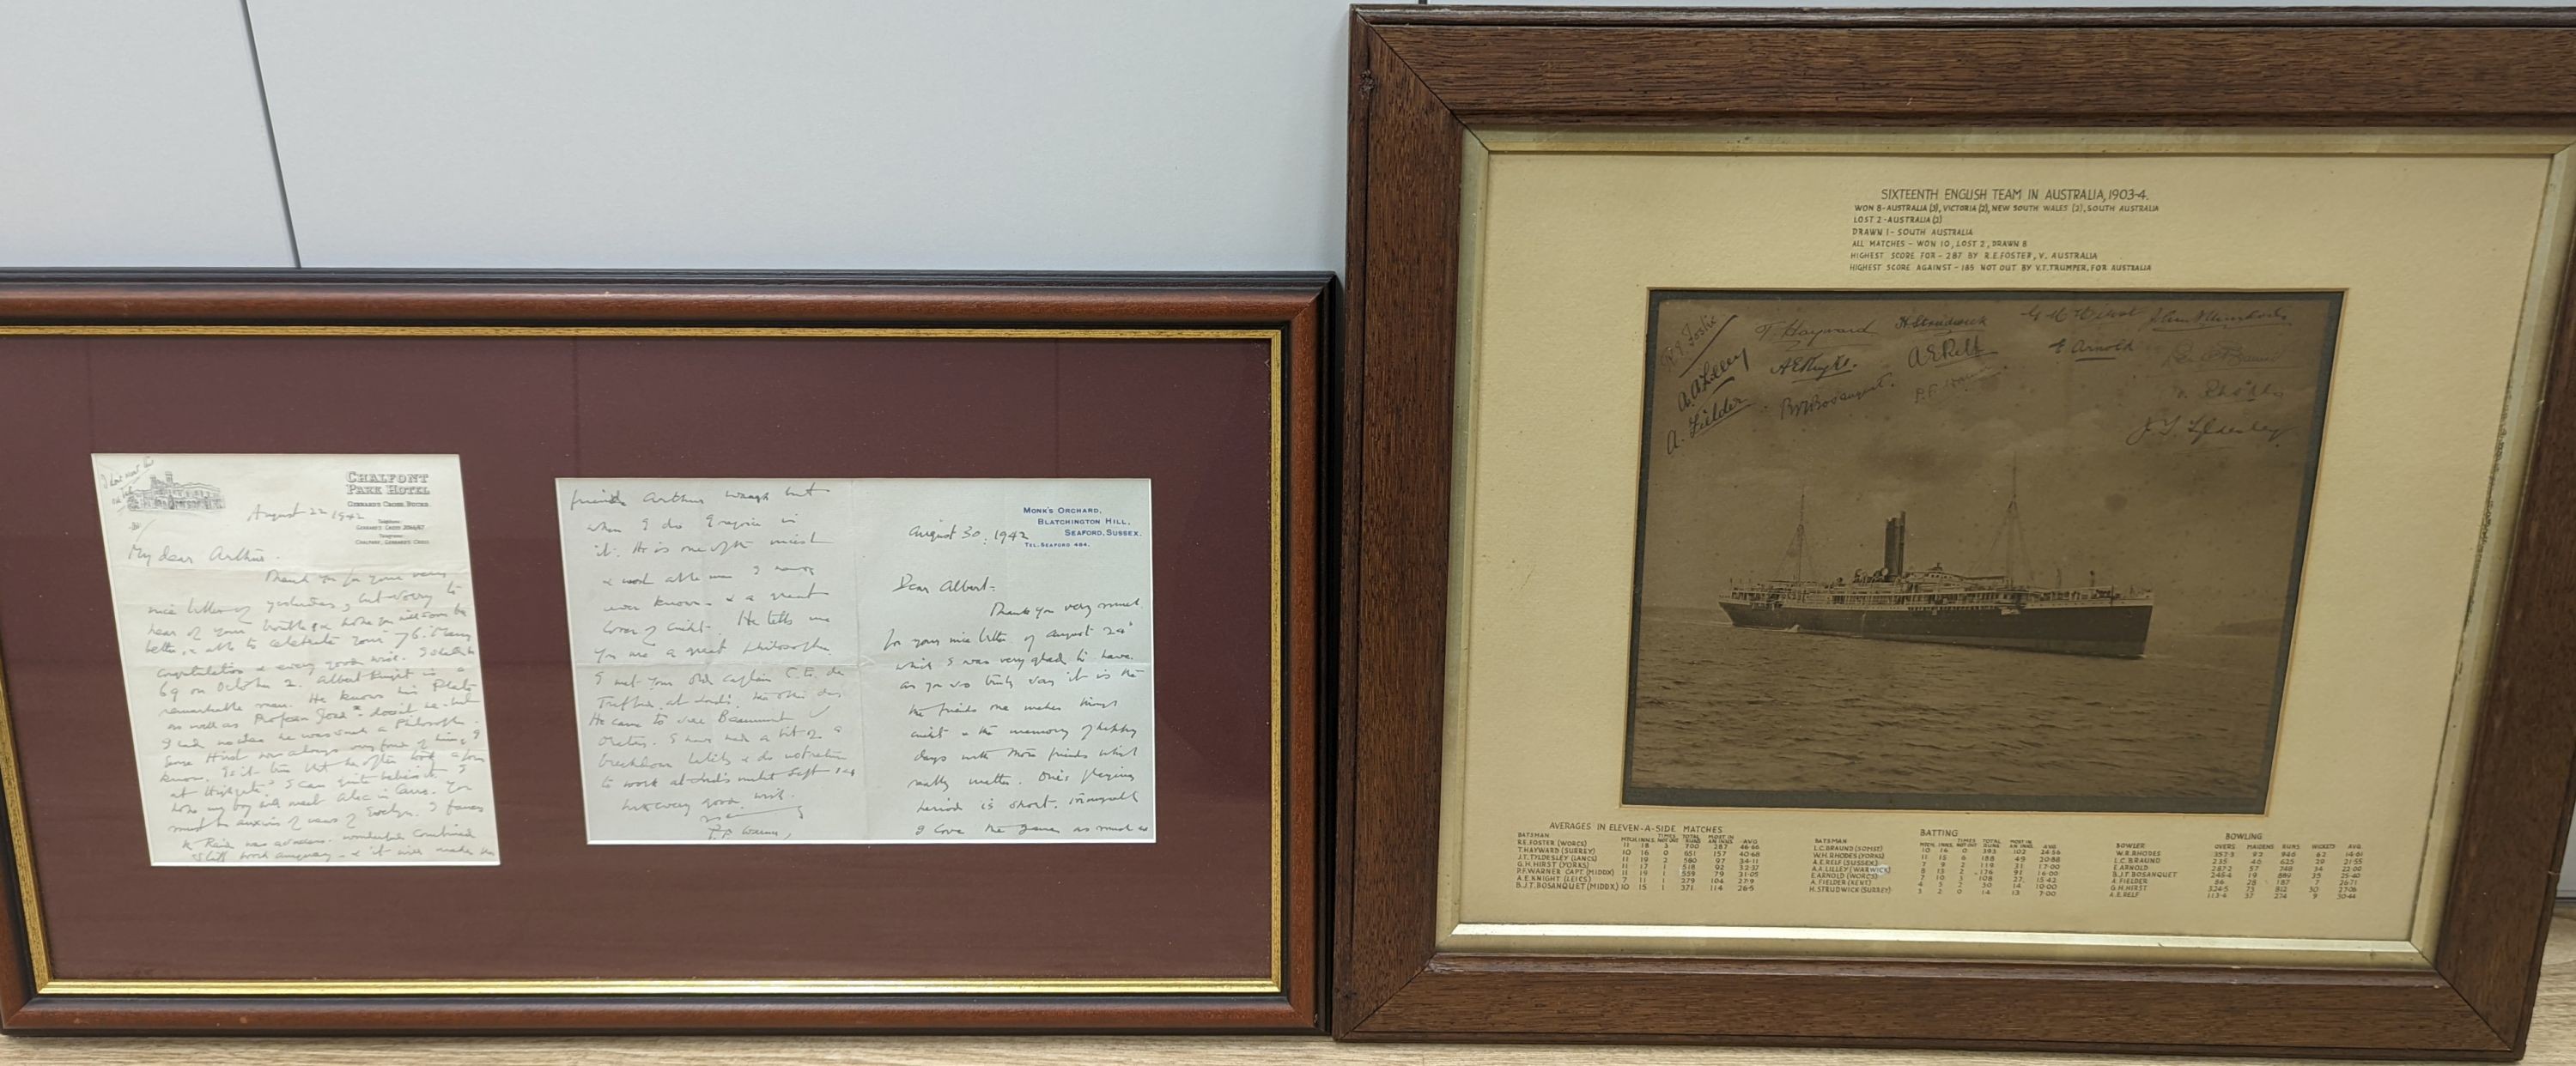 Ashes Cricket memorabilia: England Touring Australia, 1903-4, framed autographs of the England players on a photo of RMS Orontes and a framed letter written by the former captain of the Ashes tour Sir Pelham Francis ‘Plu